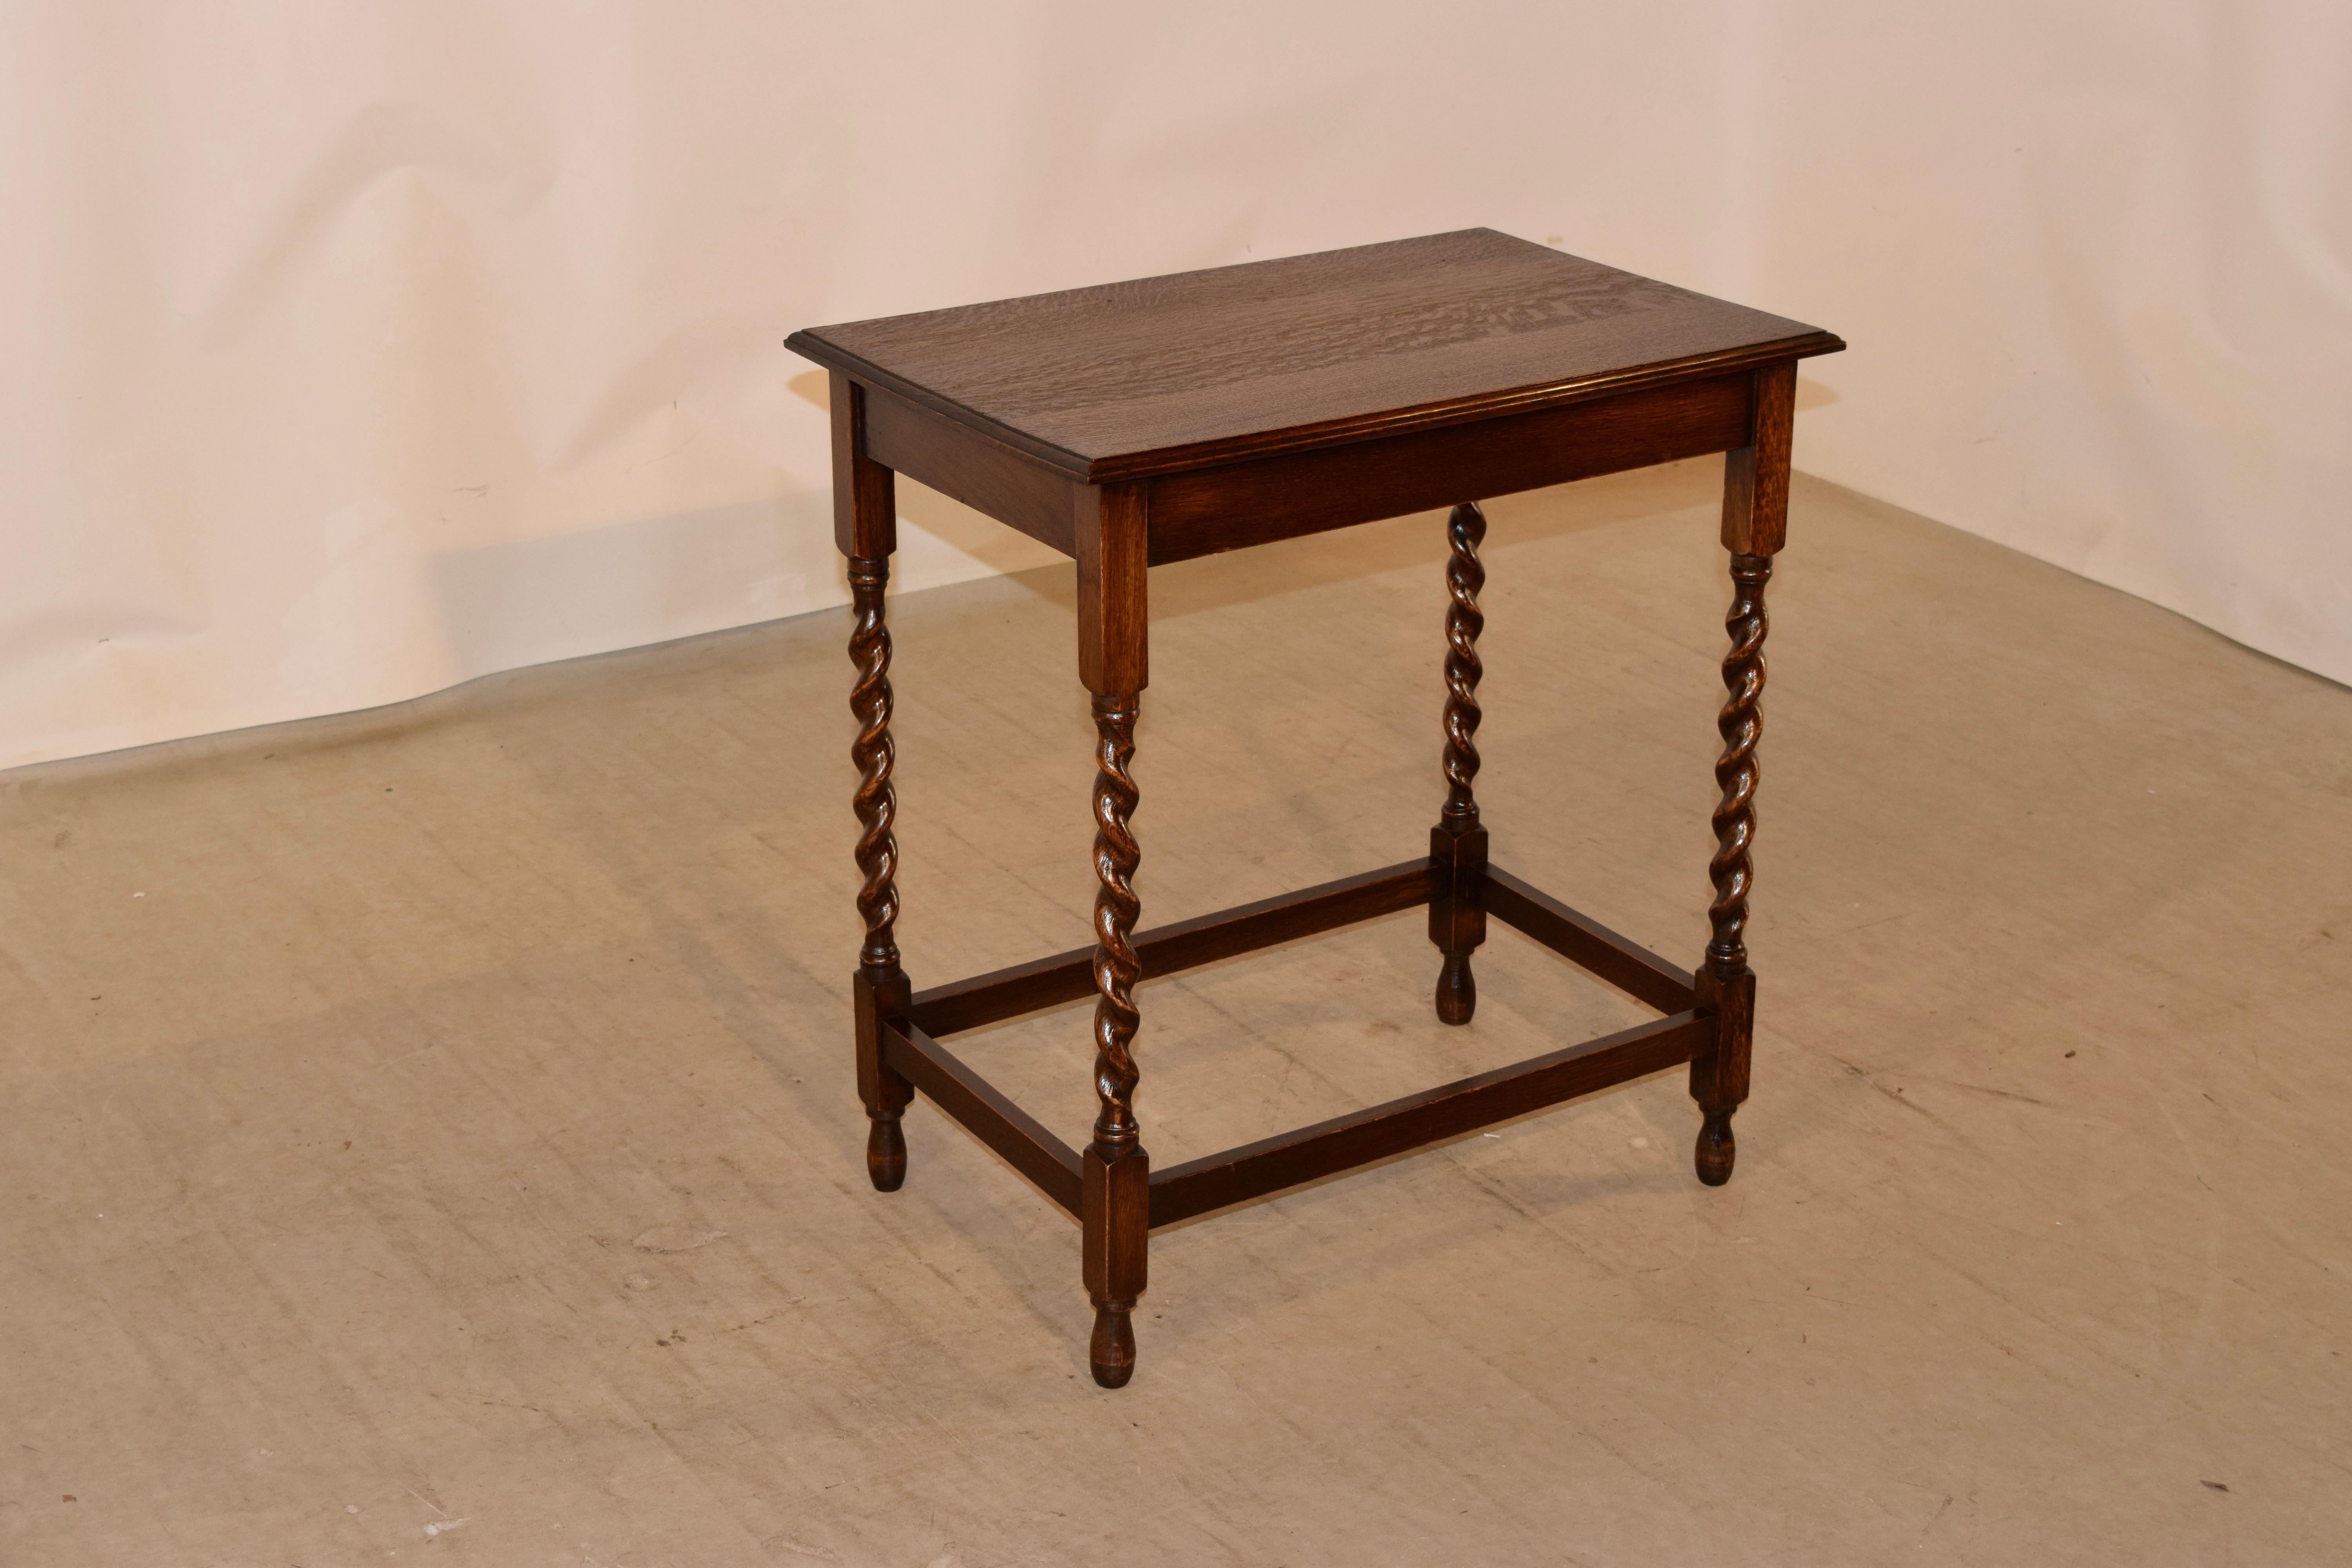 Large oak occasional table from England, c. 1900 with a beveled edge around the top, following down to a simple apron and supported on hand turned barley twist legs, joined by simple stretchers. Raised on hand turned feet.